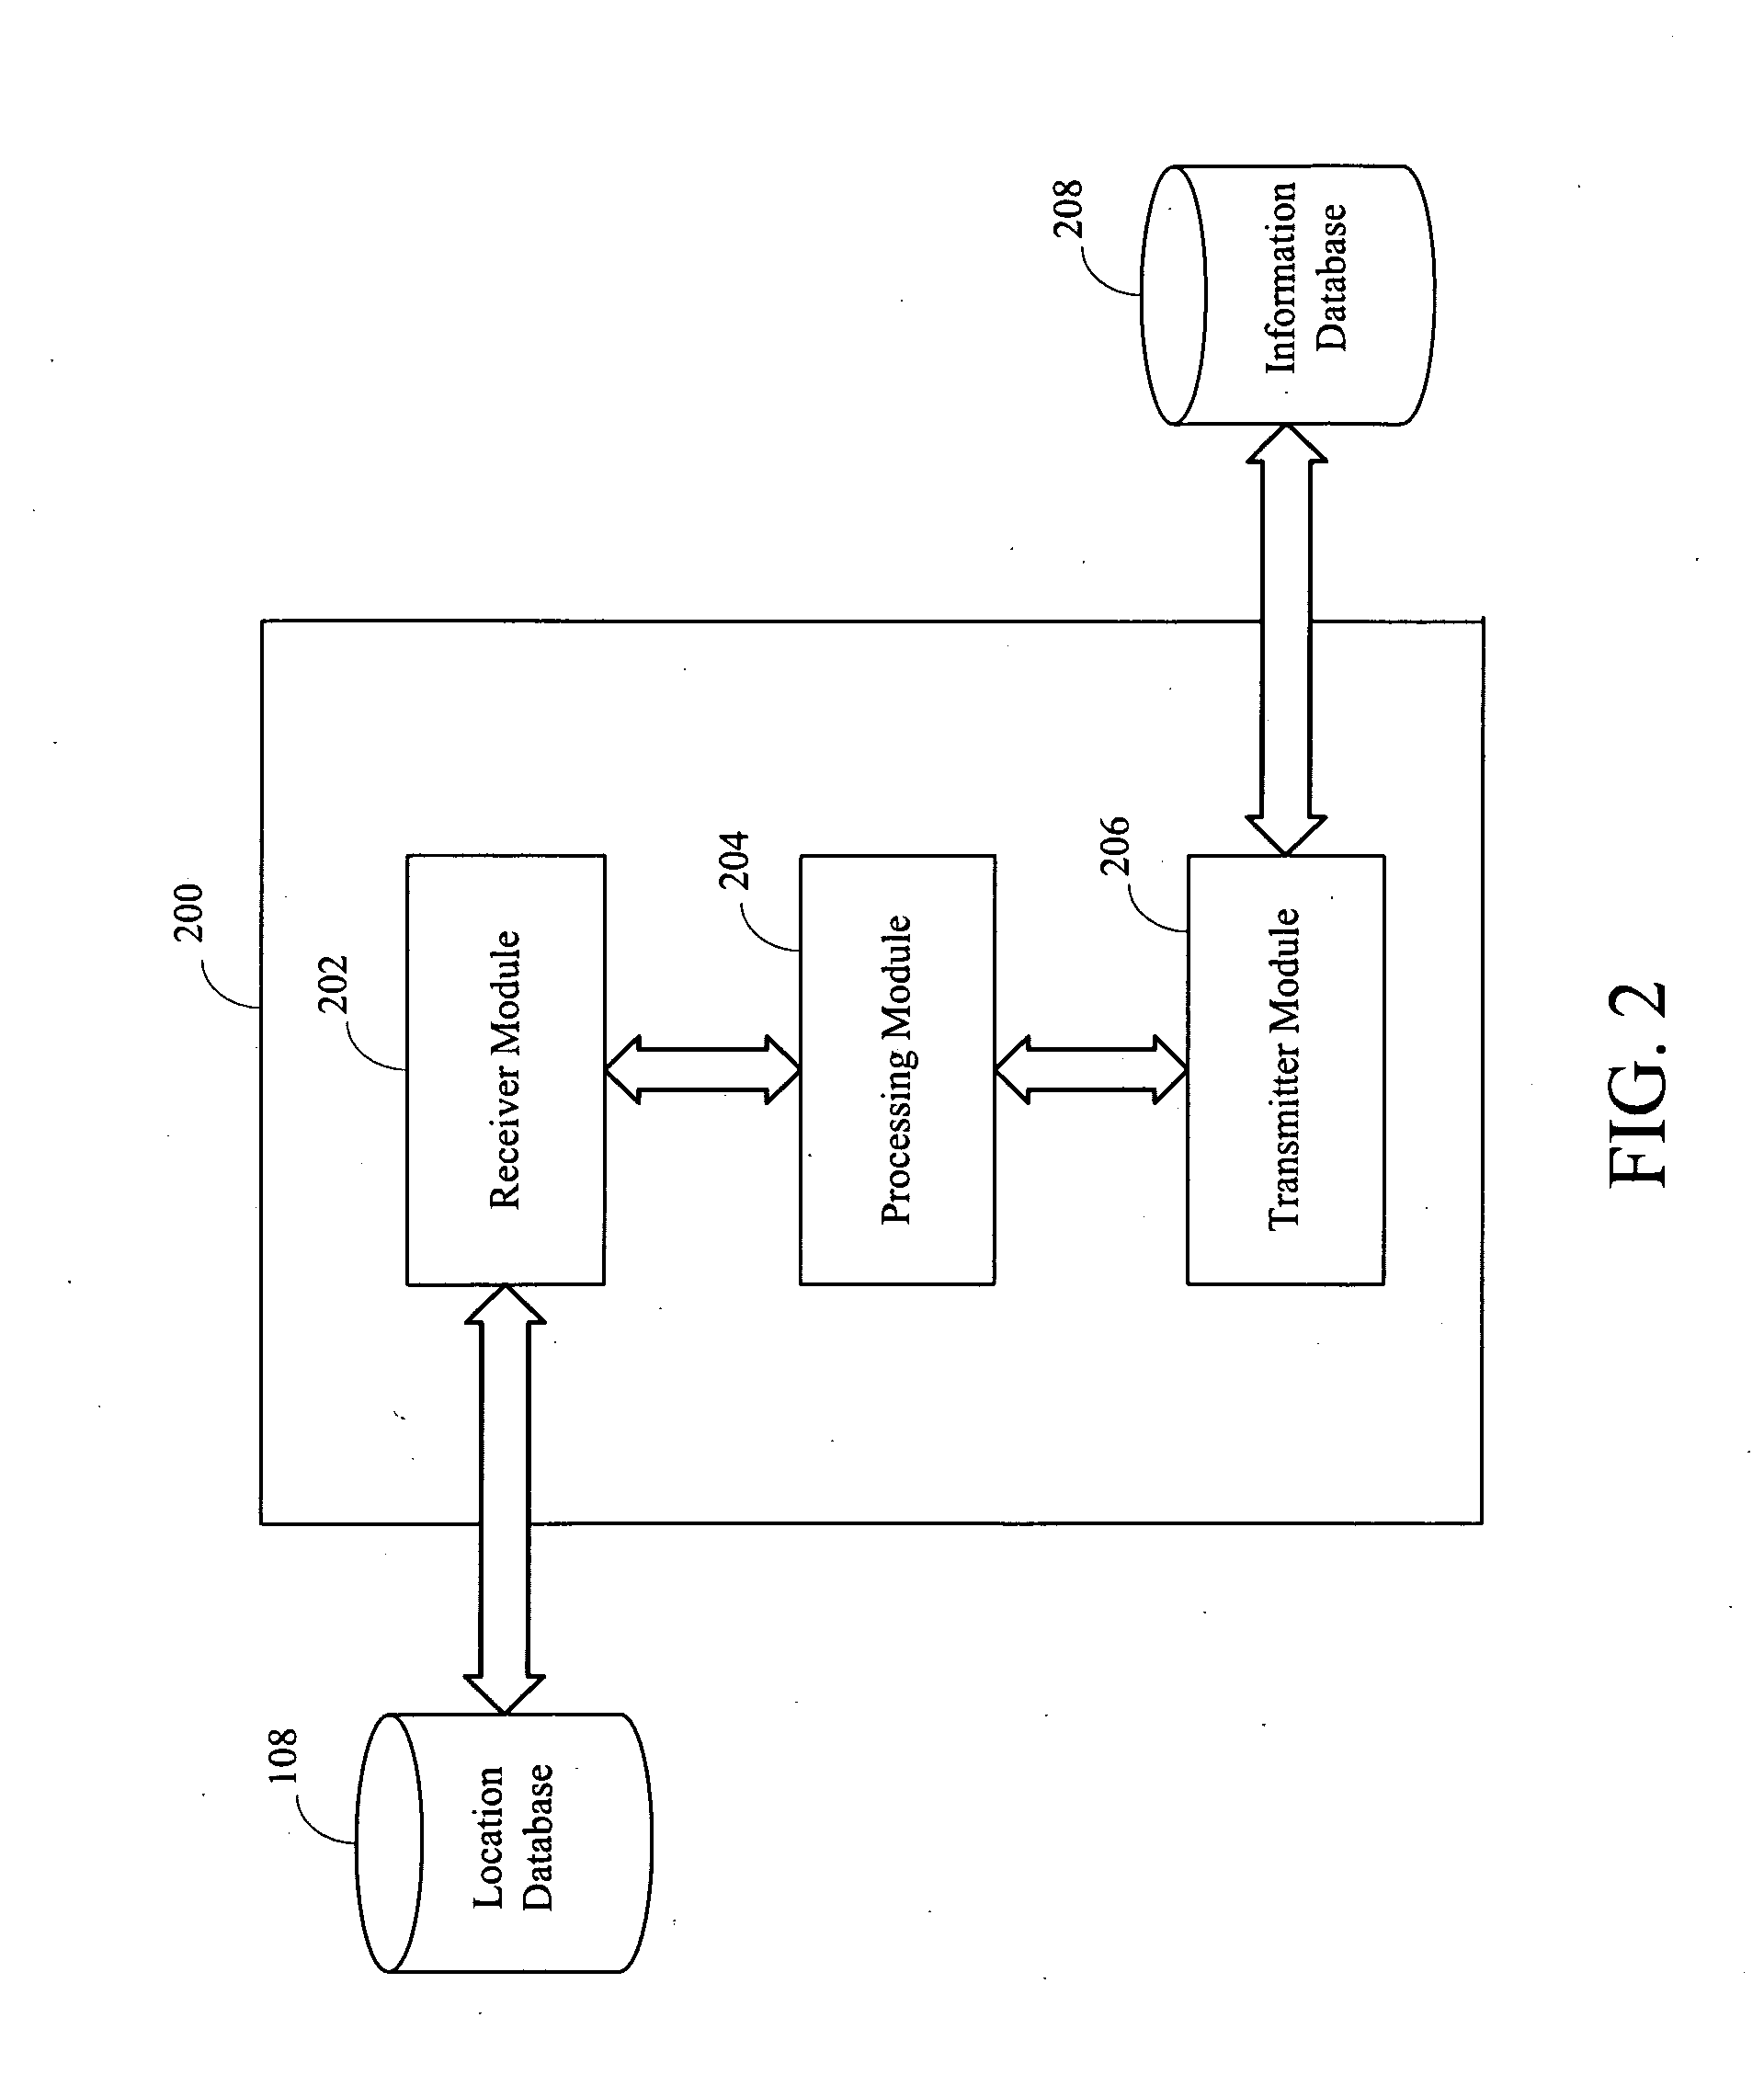 Method and system for improving applications based on location information of objects